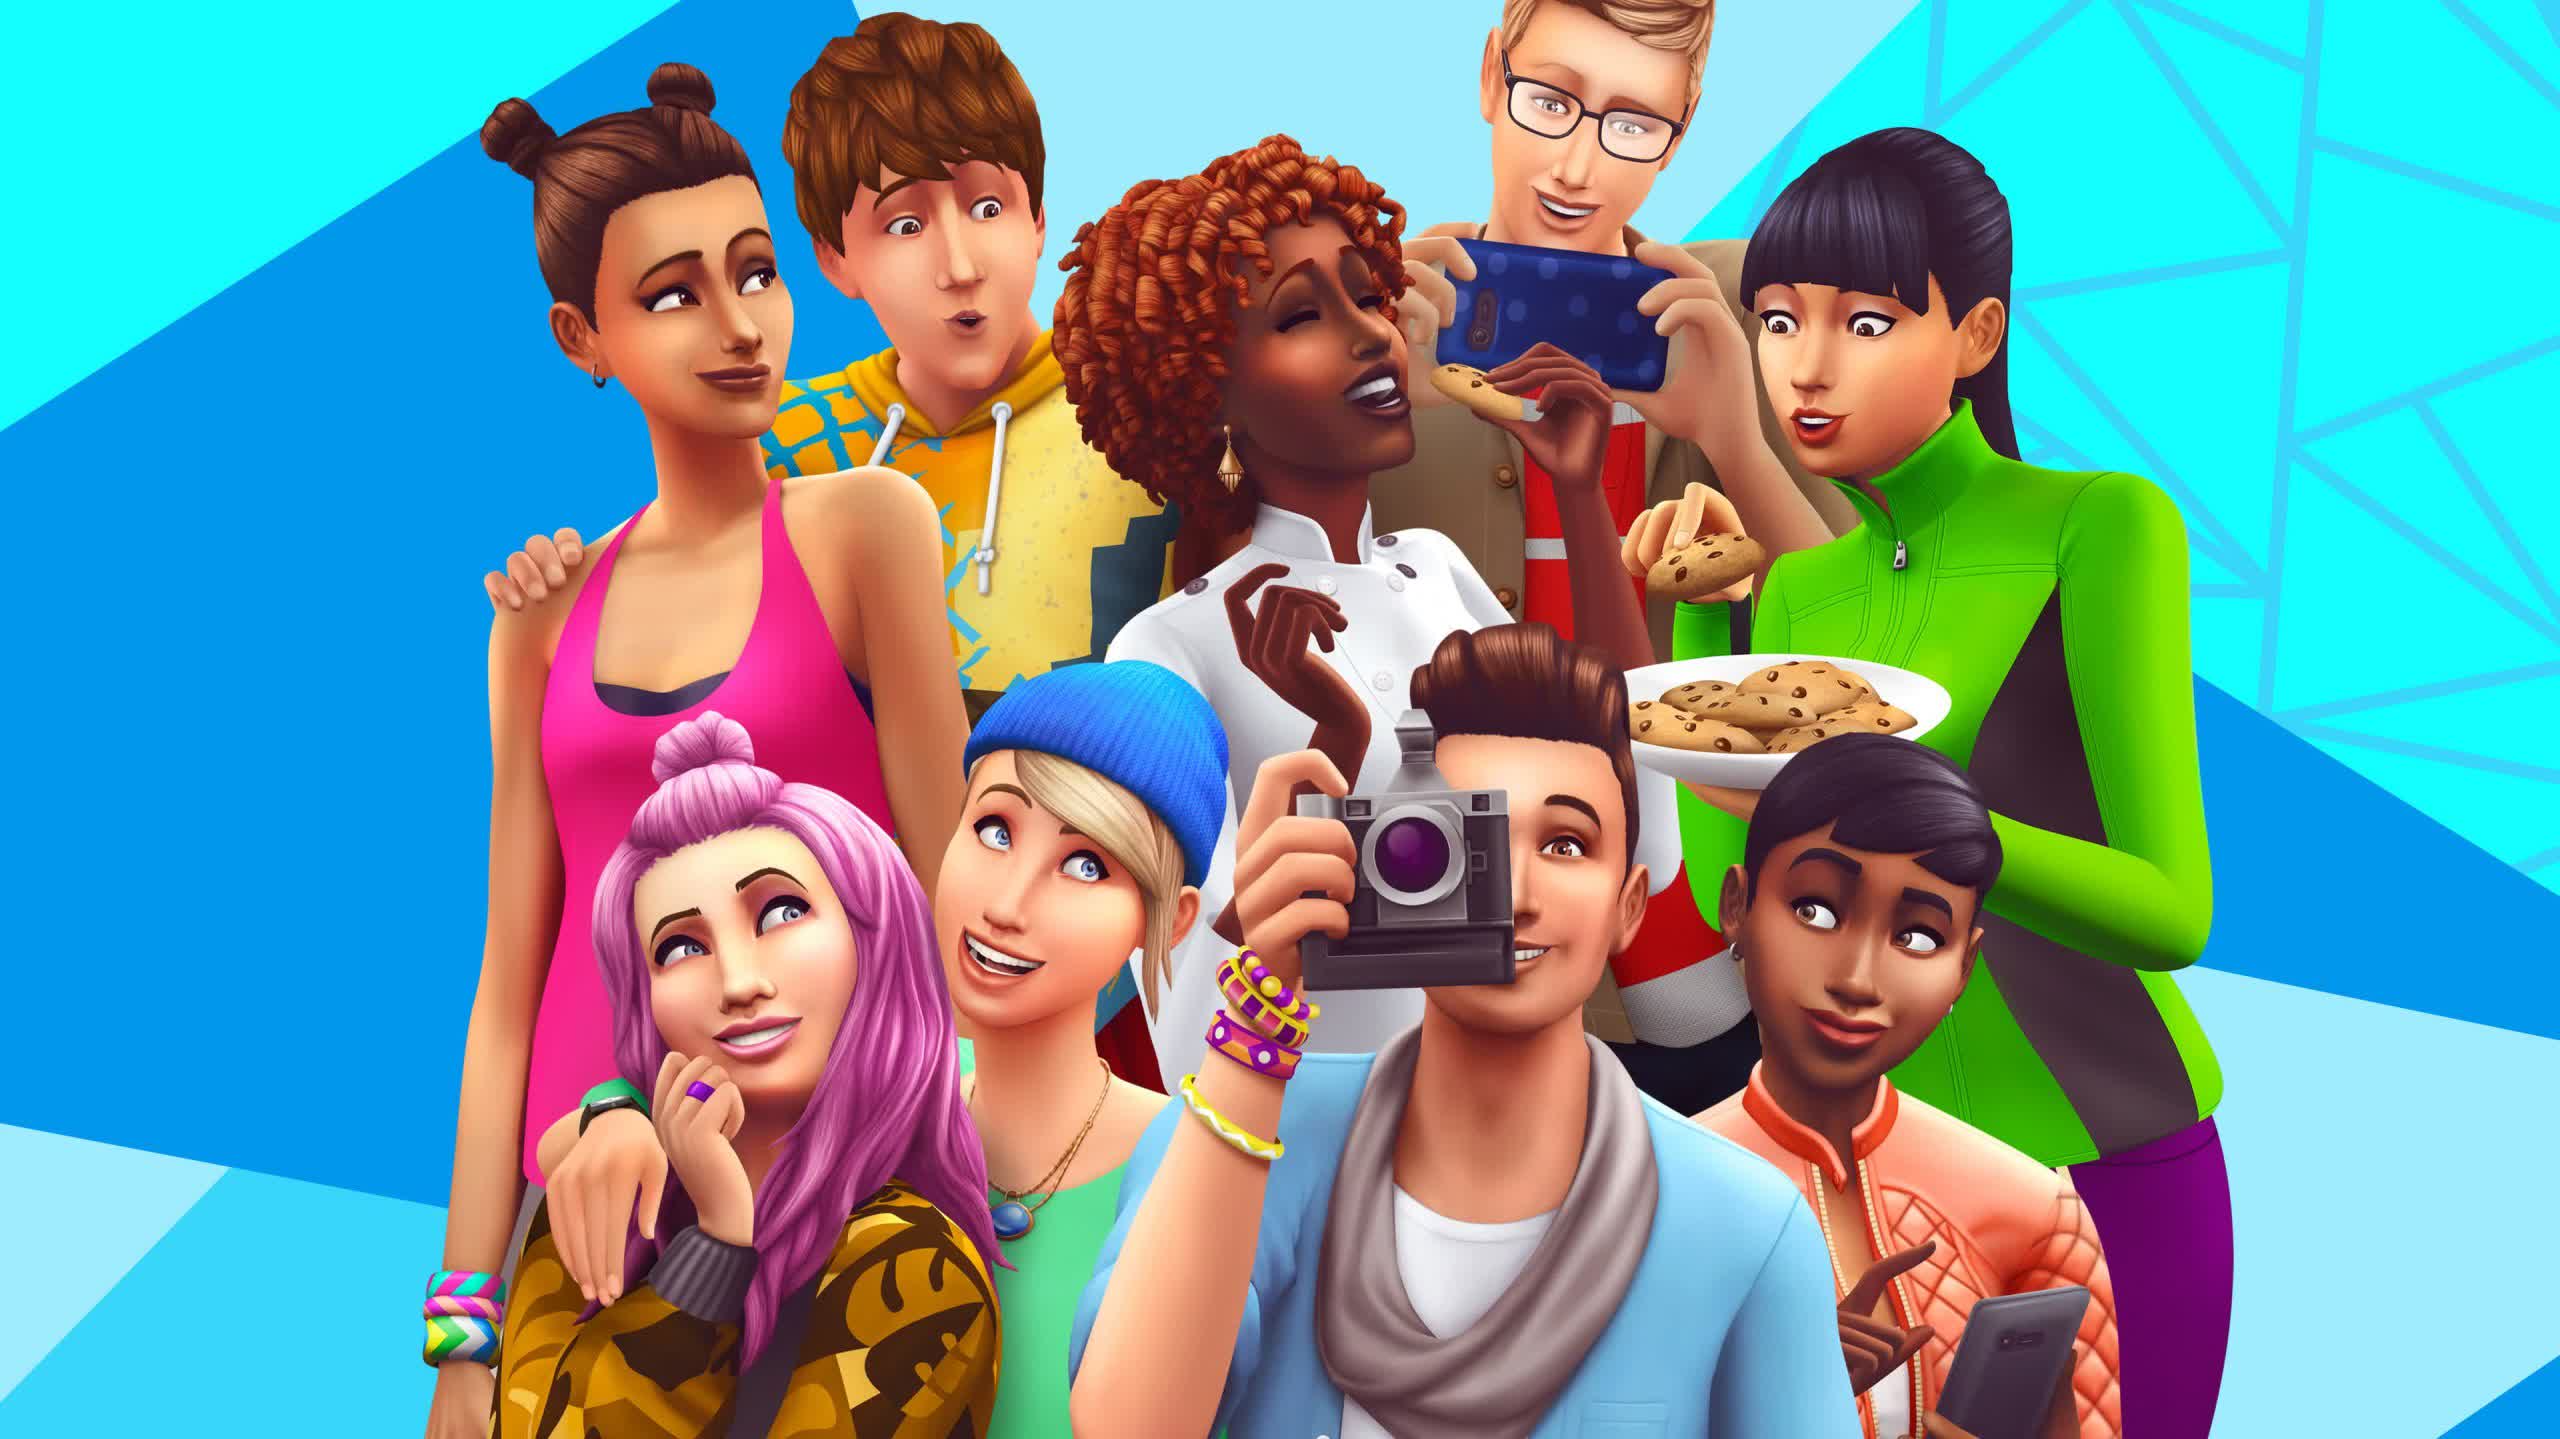 Maxis confirms The Sims 5 is in the works